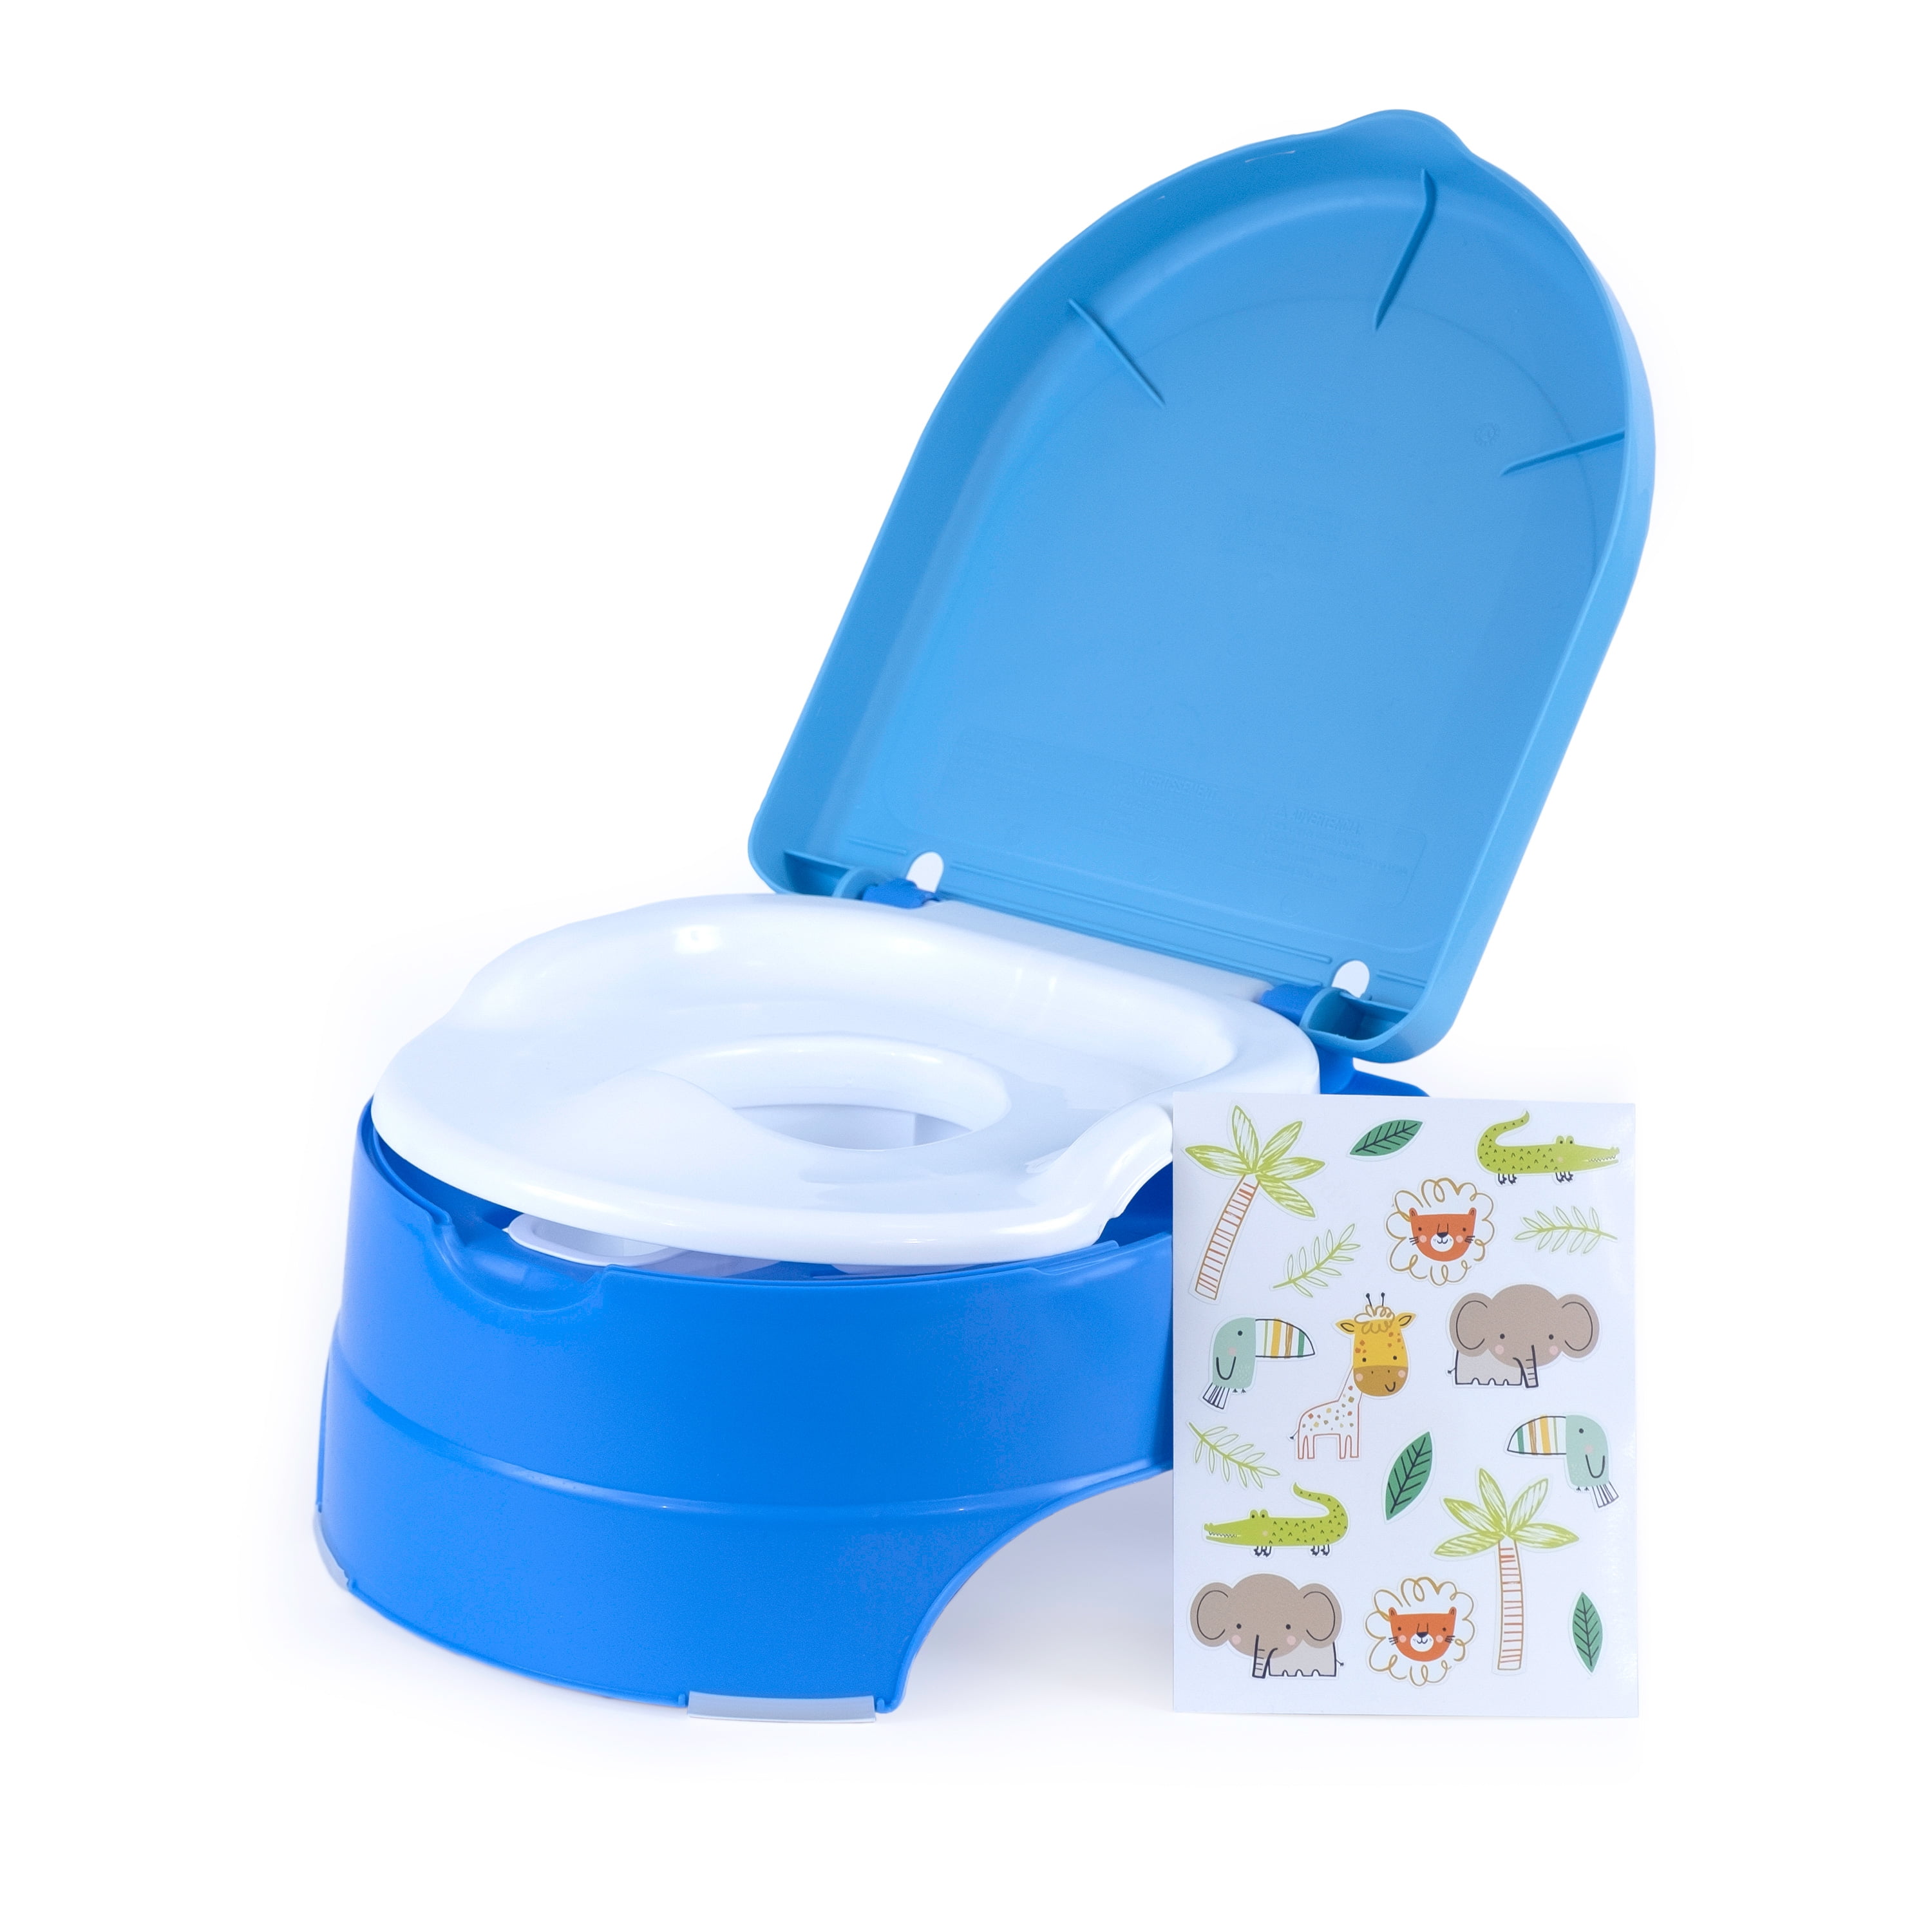 Summer Infant My Fun Potty (Blue), Includes Removable Potty Topper